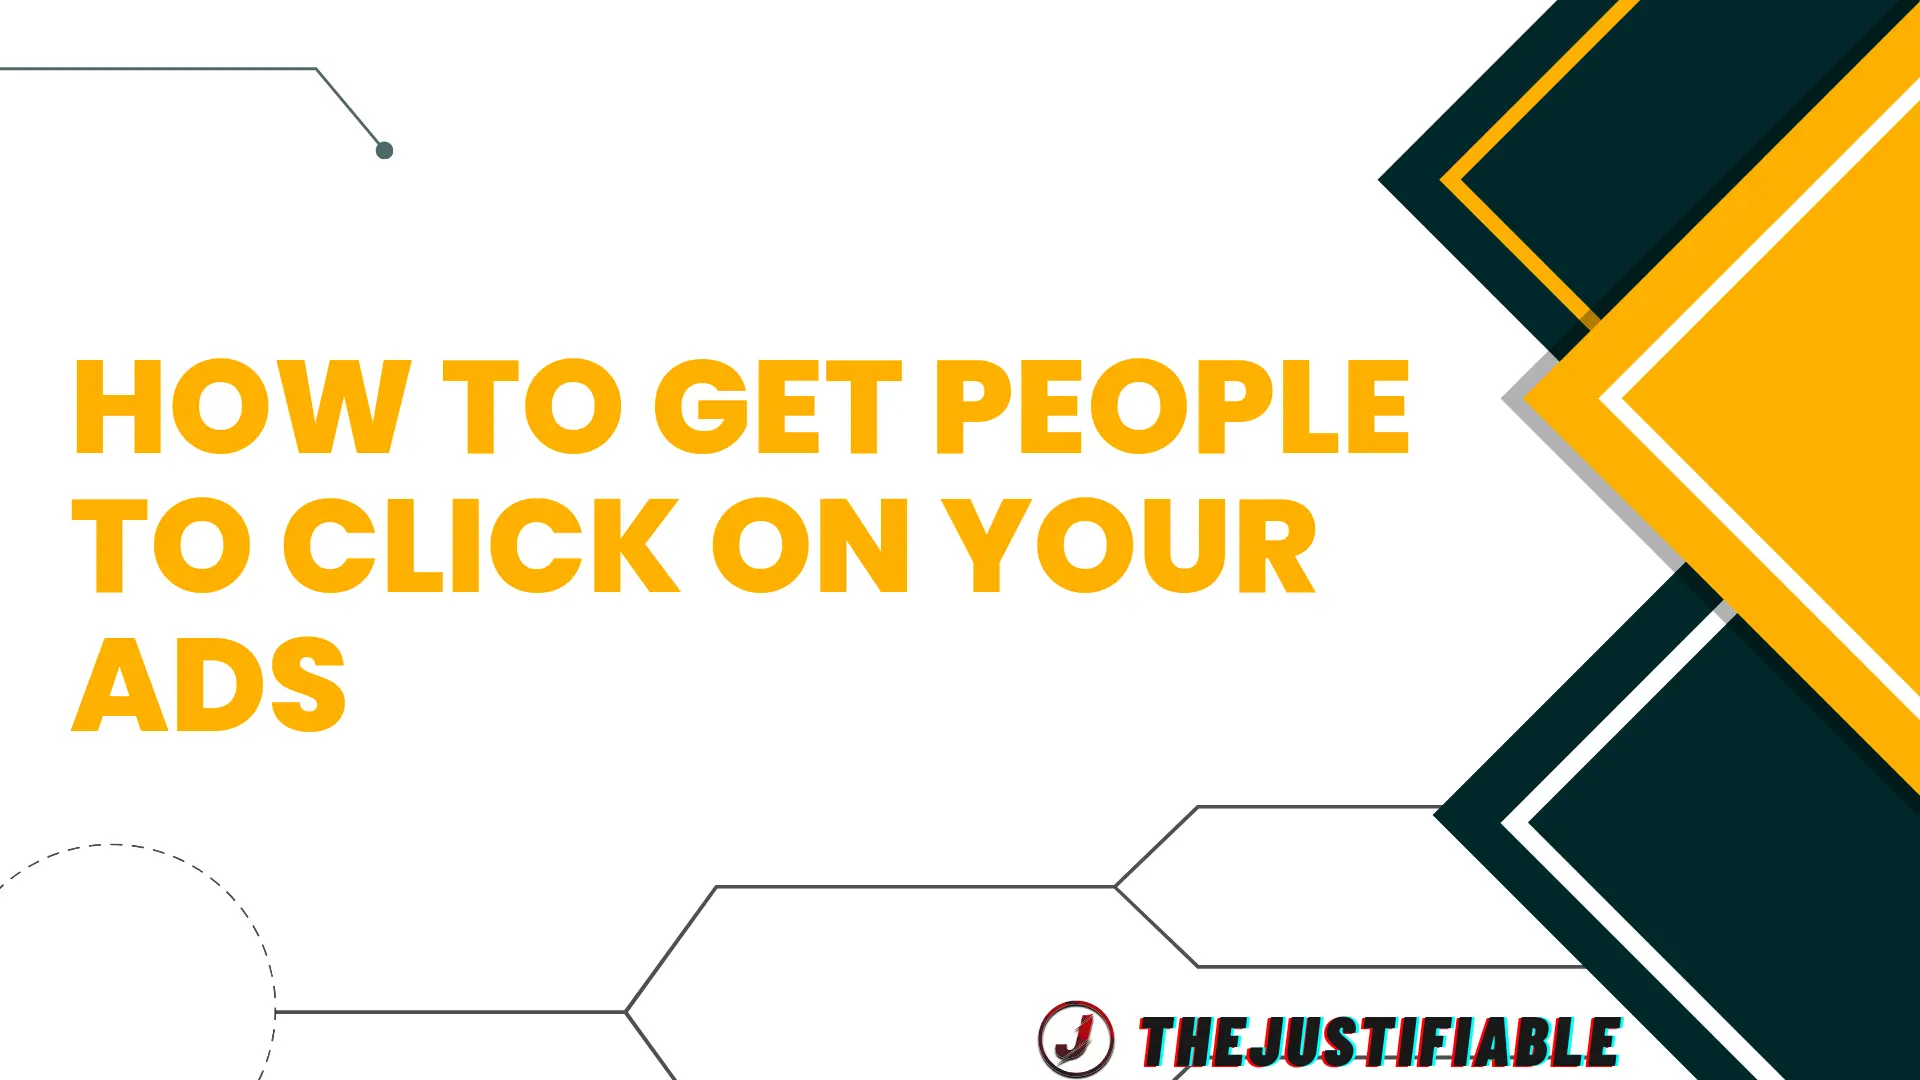 The image is a graphic related to: how to get people to click on your ads.